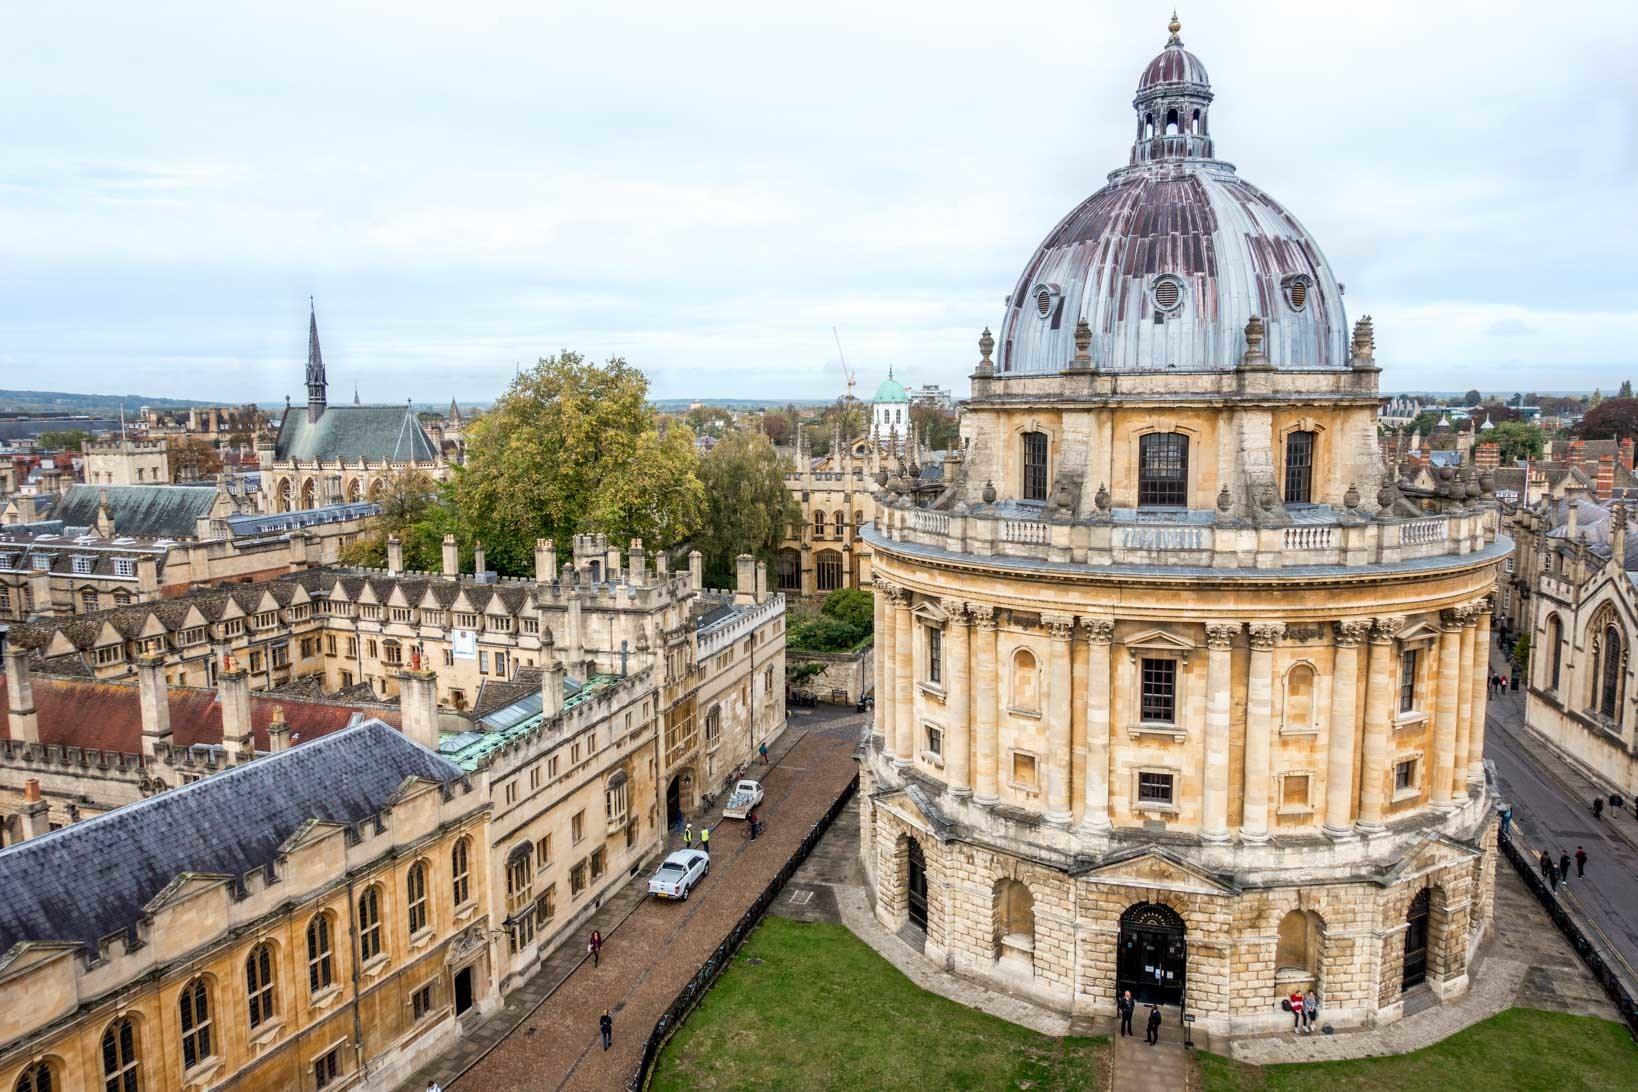 Seeing Radcliffe Camera from St. Mary's tower is one of the top Oxford sights